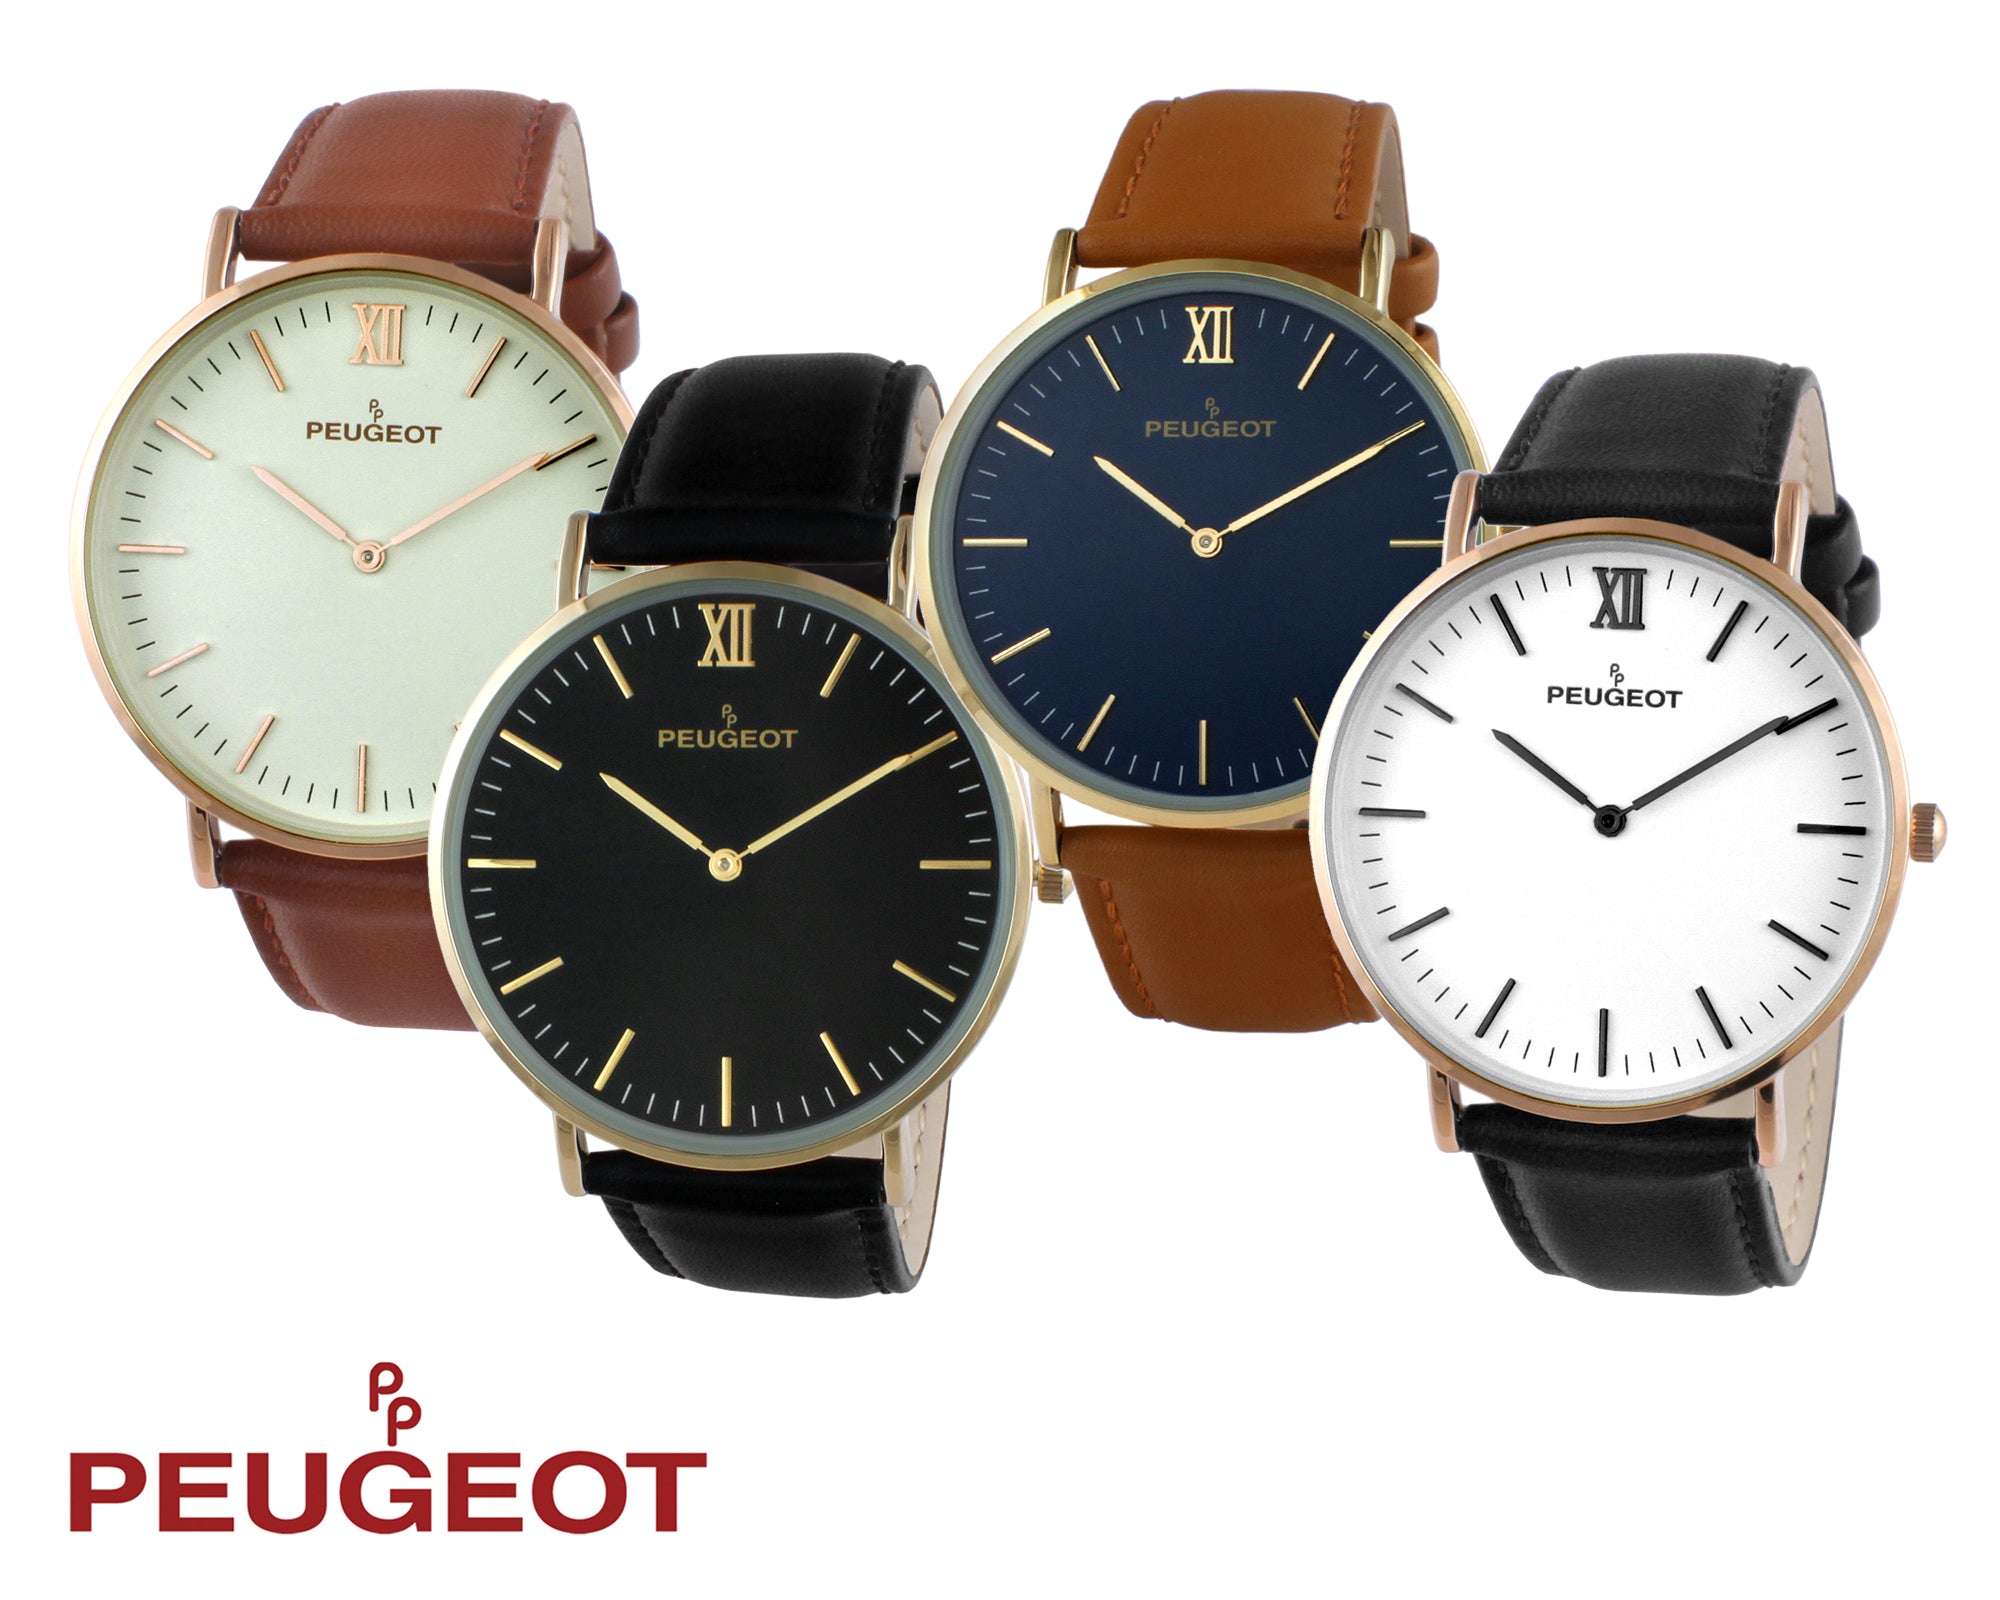 Men's Slim 14K Gold Plated with Leather Band - Peugeot Watches